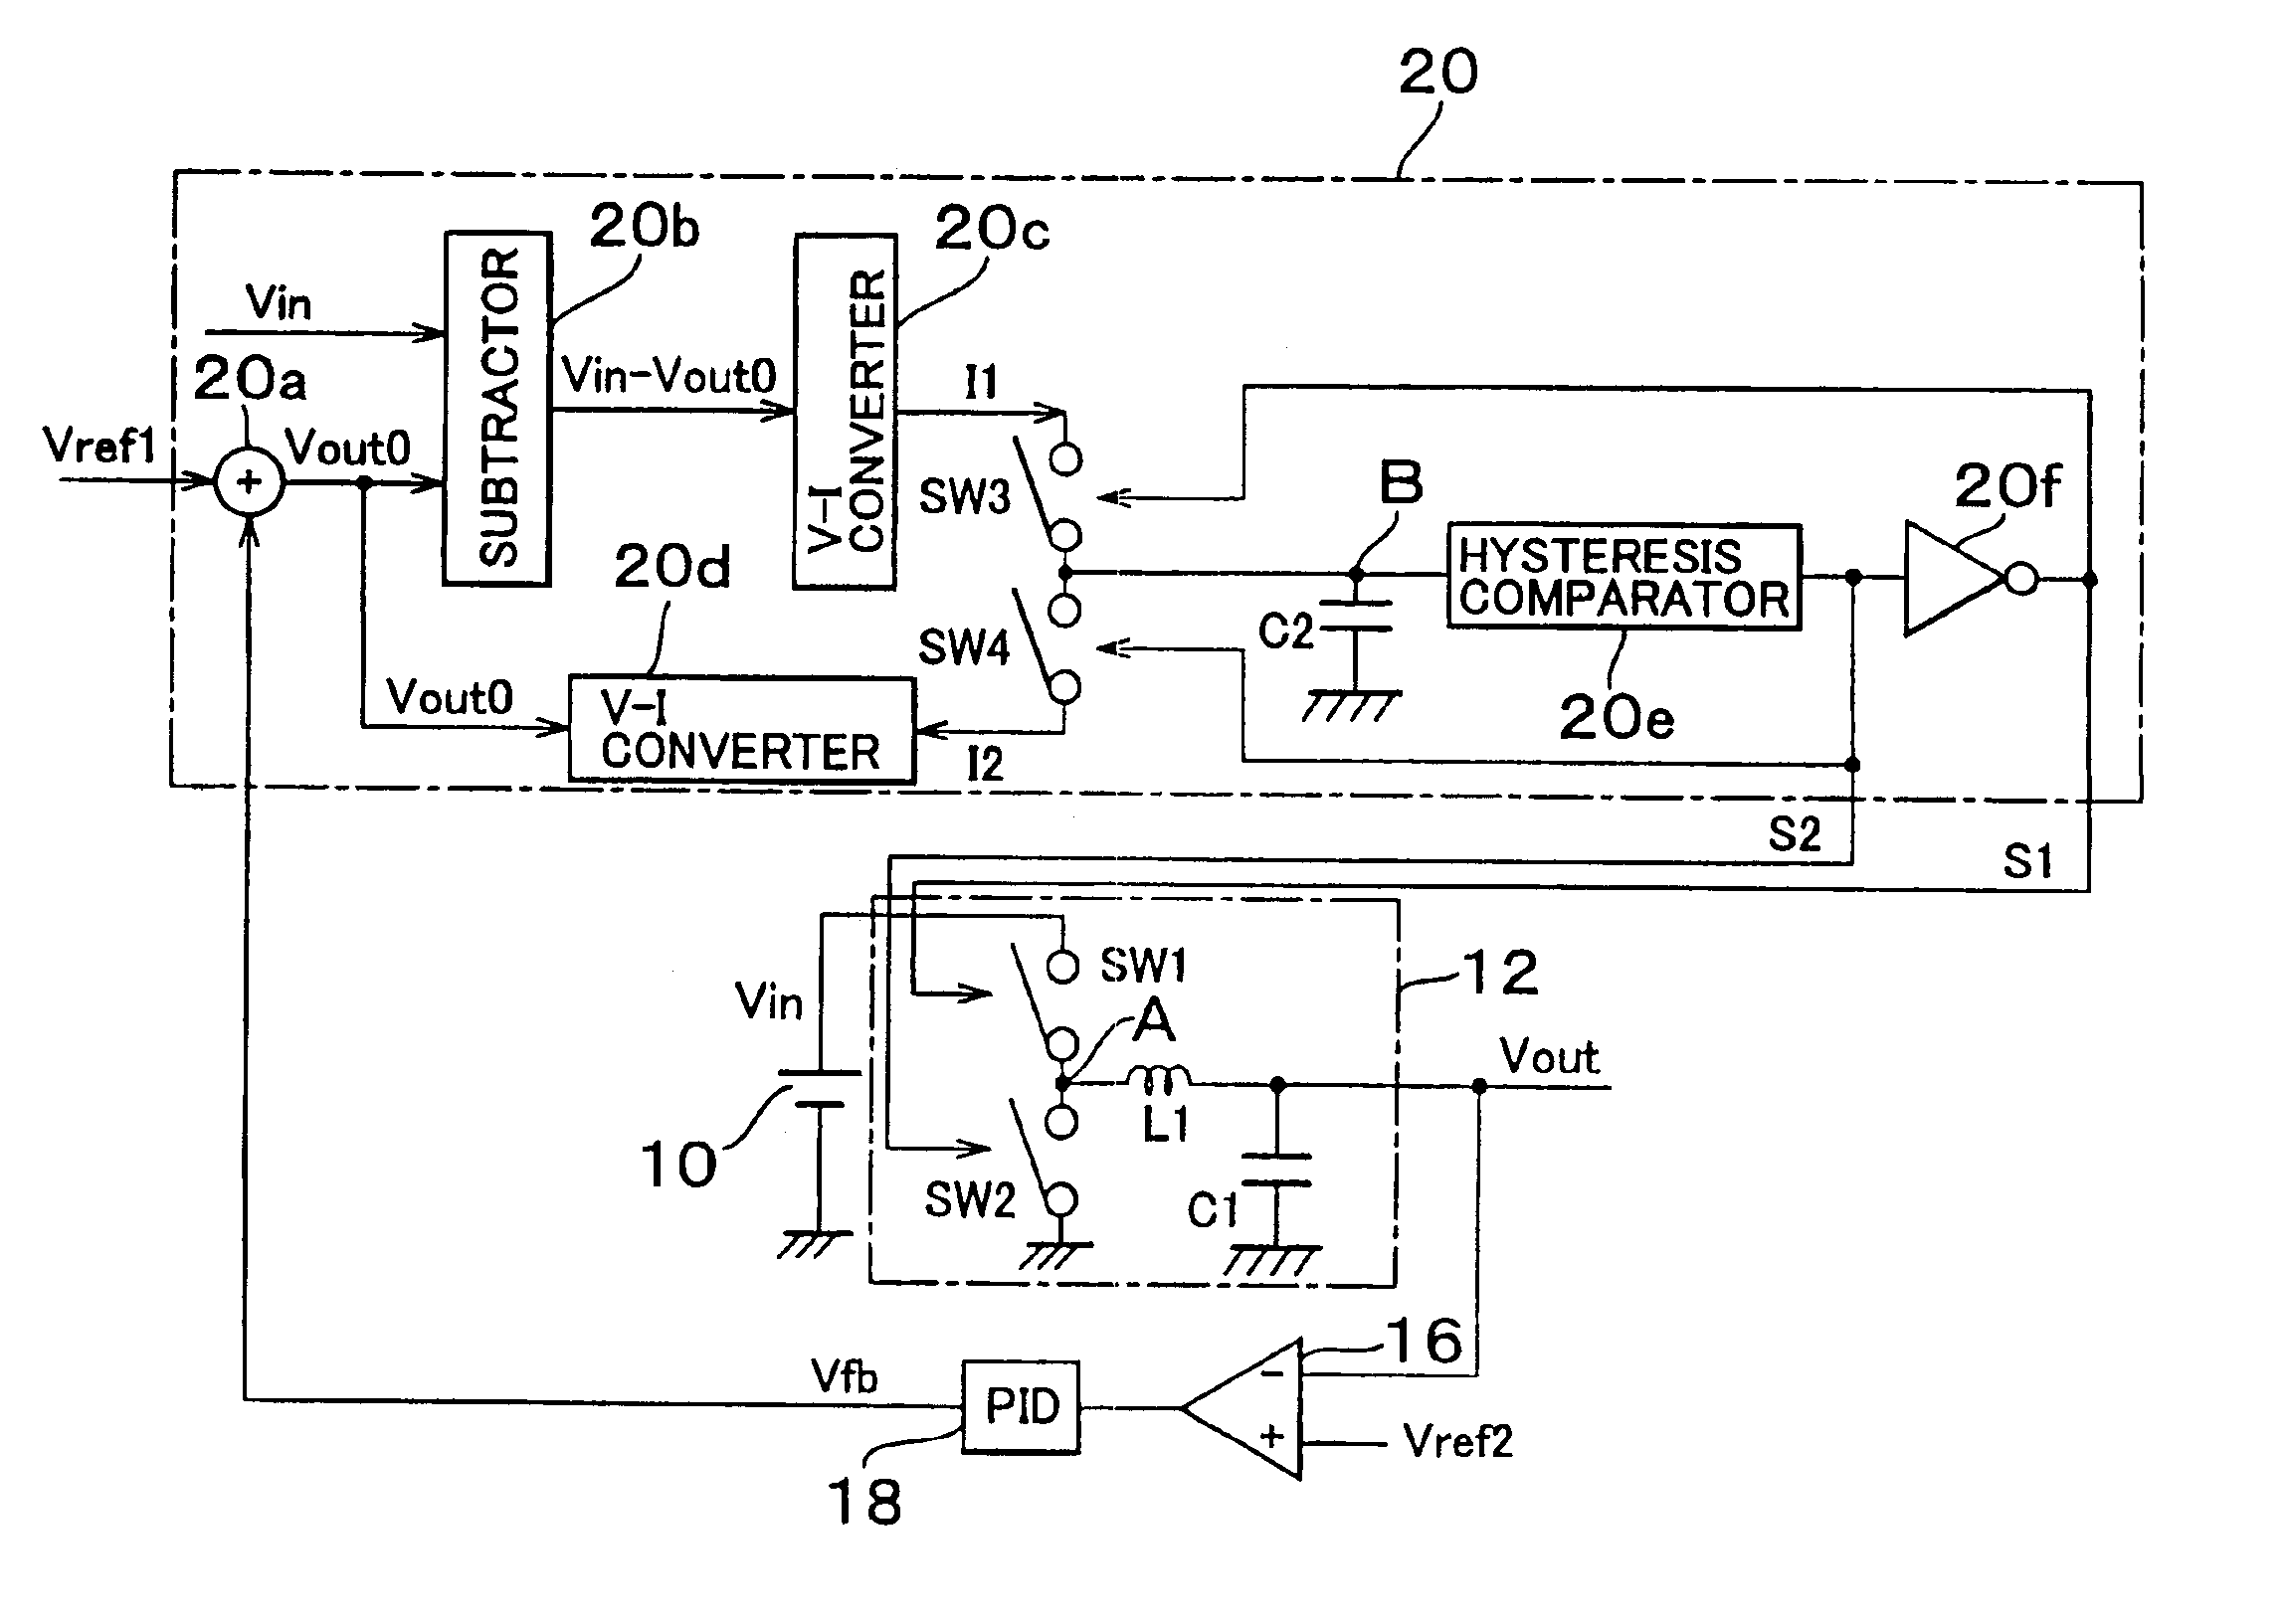 DC-DC converter with feed-forward and feedback control